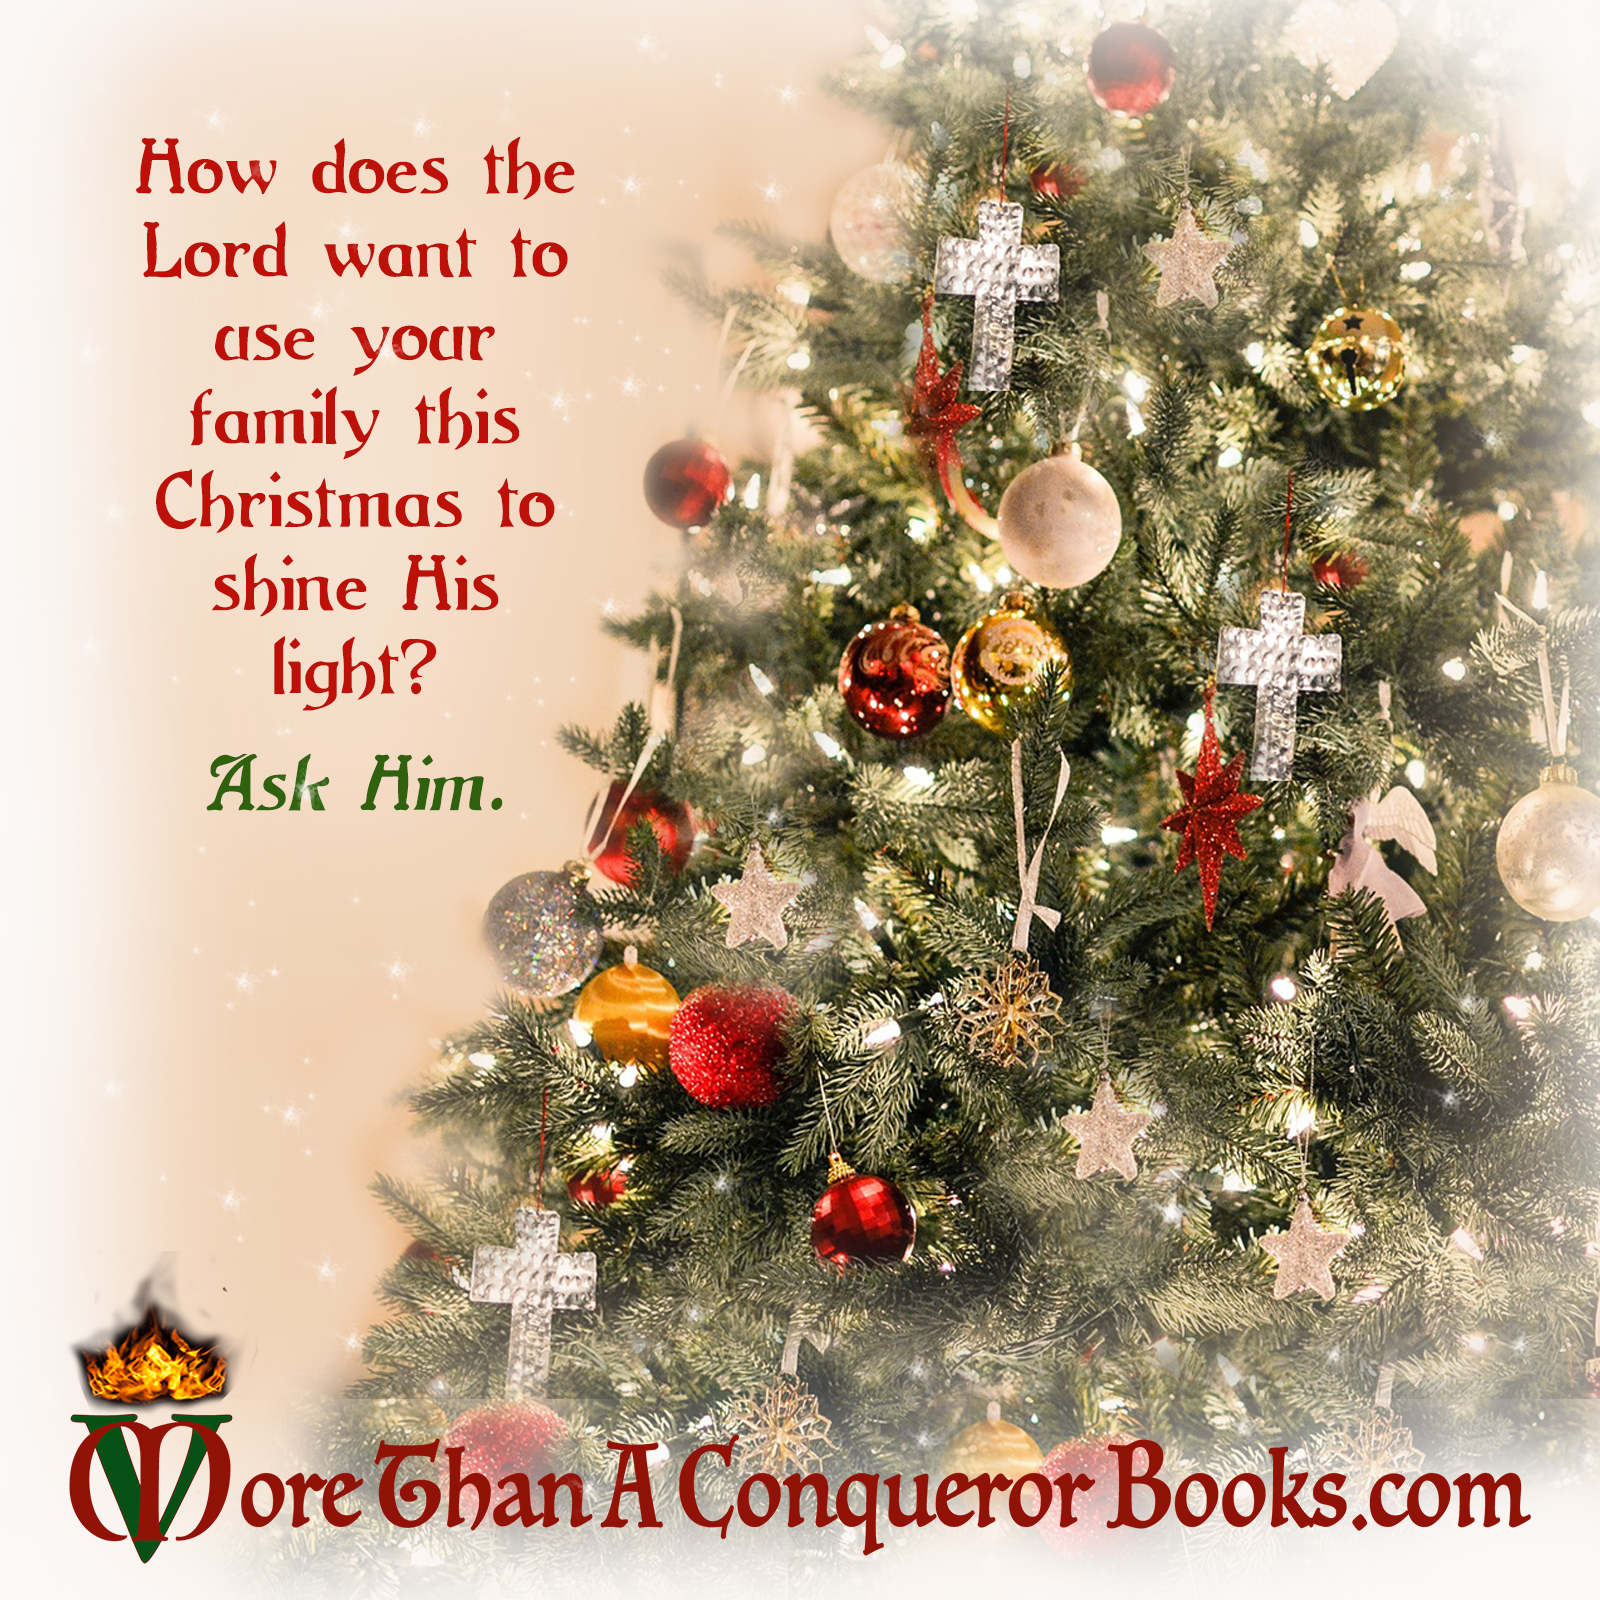 Christmas-How does God want to use your family to shine His light-Mikaela Vincent-MoreThanAConquerorBooks